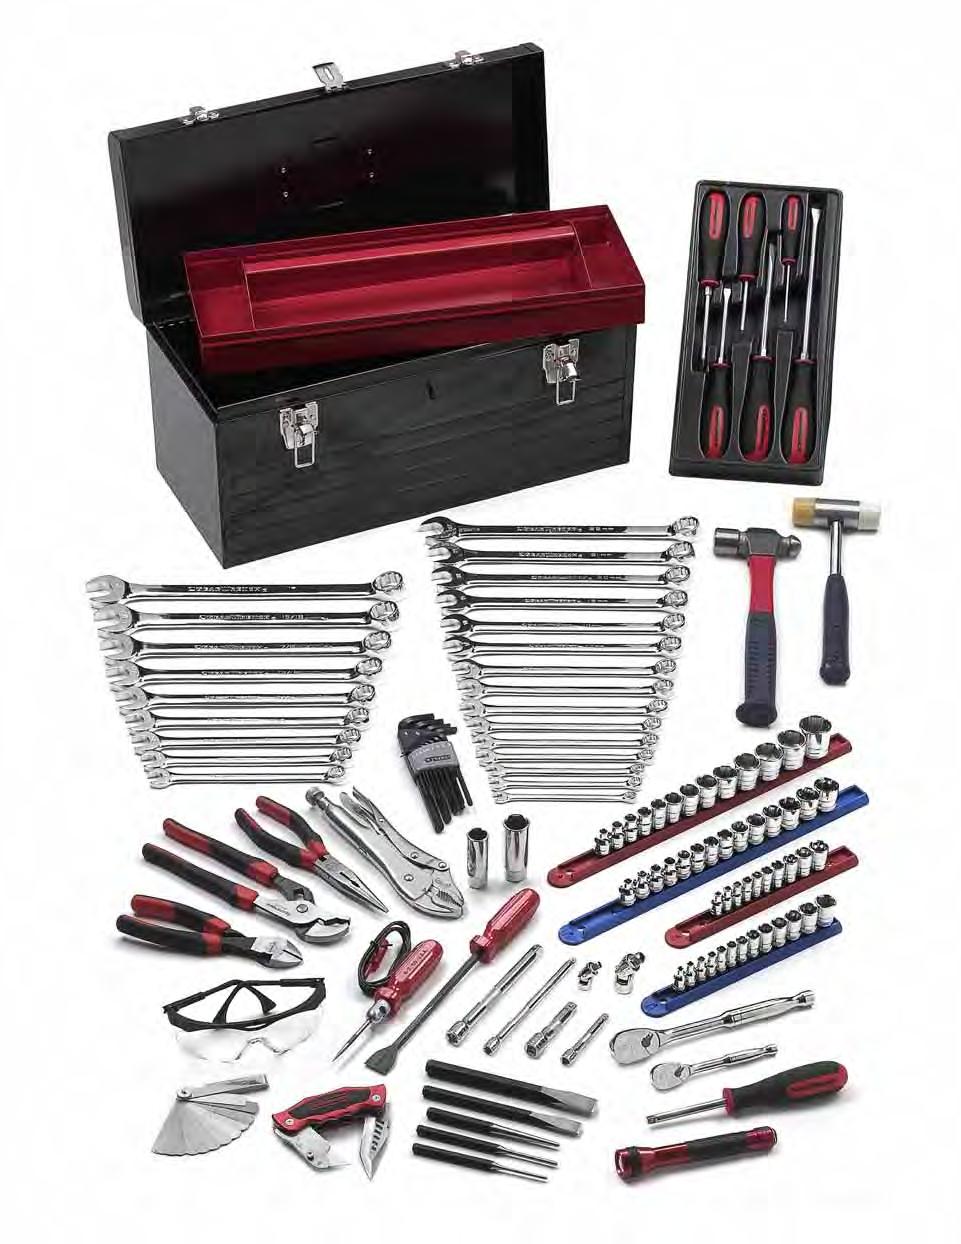 TOOL SETS SETS 83090 - Auto Introductory Set SAE/METRIC 81658 5/8" 81670 13mm 81659 11/16" 81671 14mm 81660 3/4" 81672 15mm 81661 13/16" 81673 16mm 81662 7/8" 81674 17mm 81663 15/16" 81675 18mm 81664